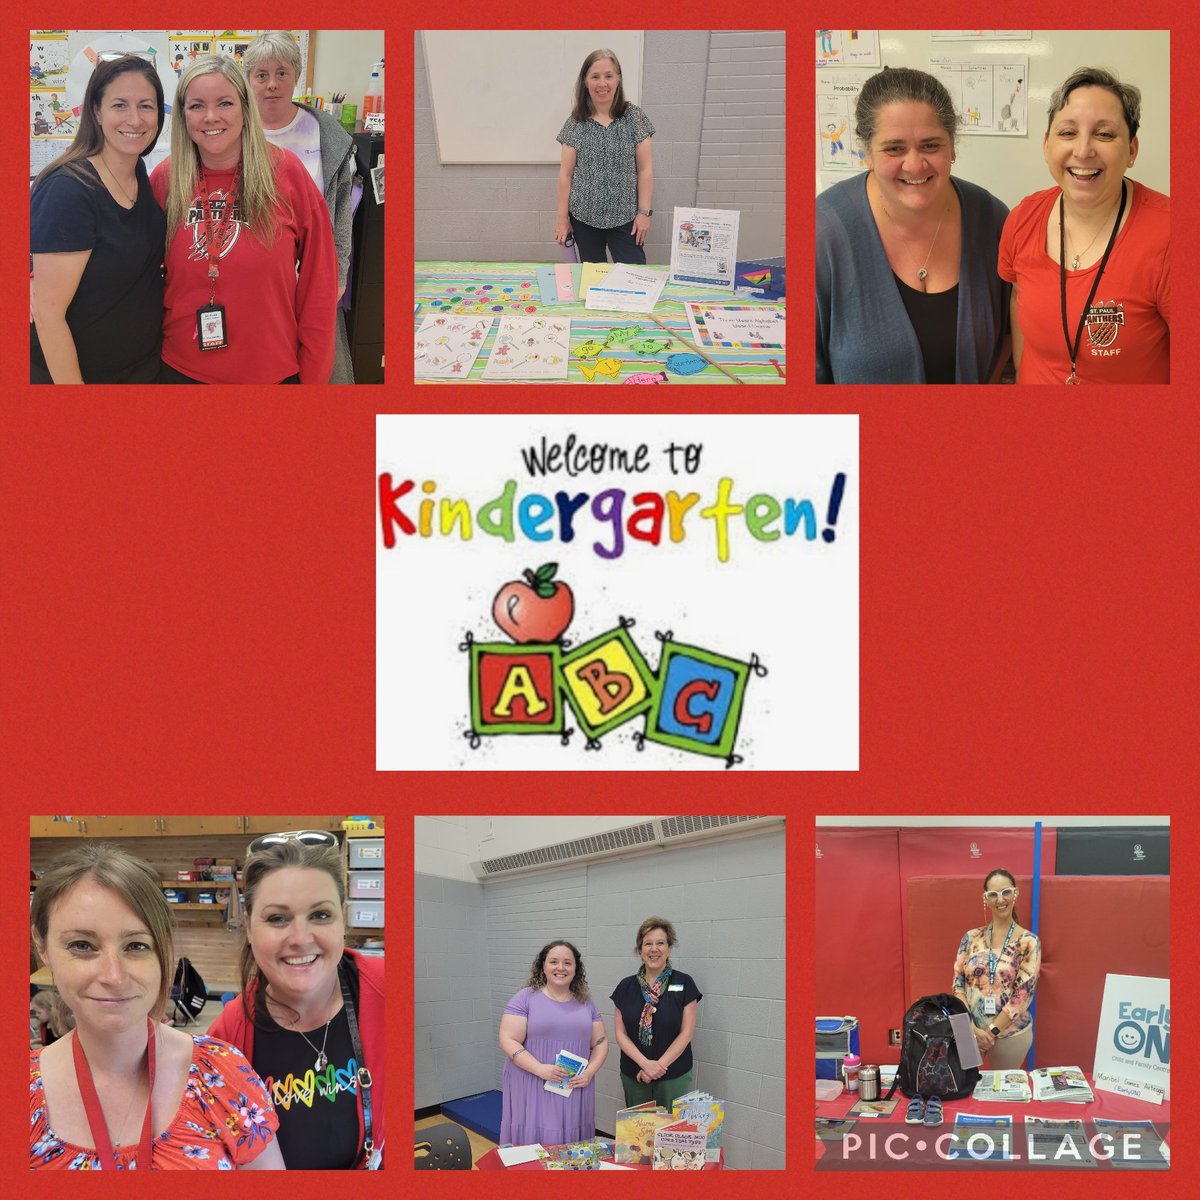 Welcome to Kindergarten was a huge success! It was so nice to meet our students and their families. #Excited #WCDSBAwesome #WCDSBNewswire